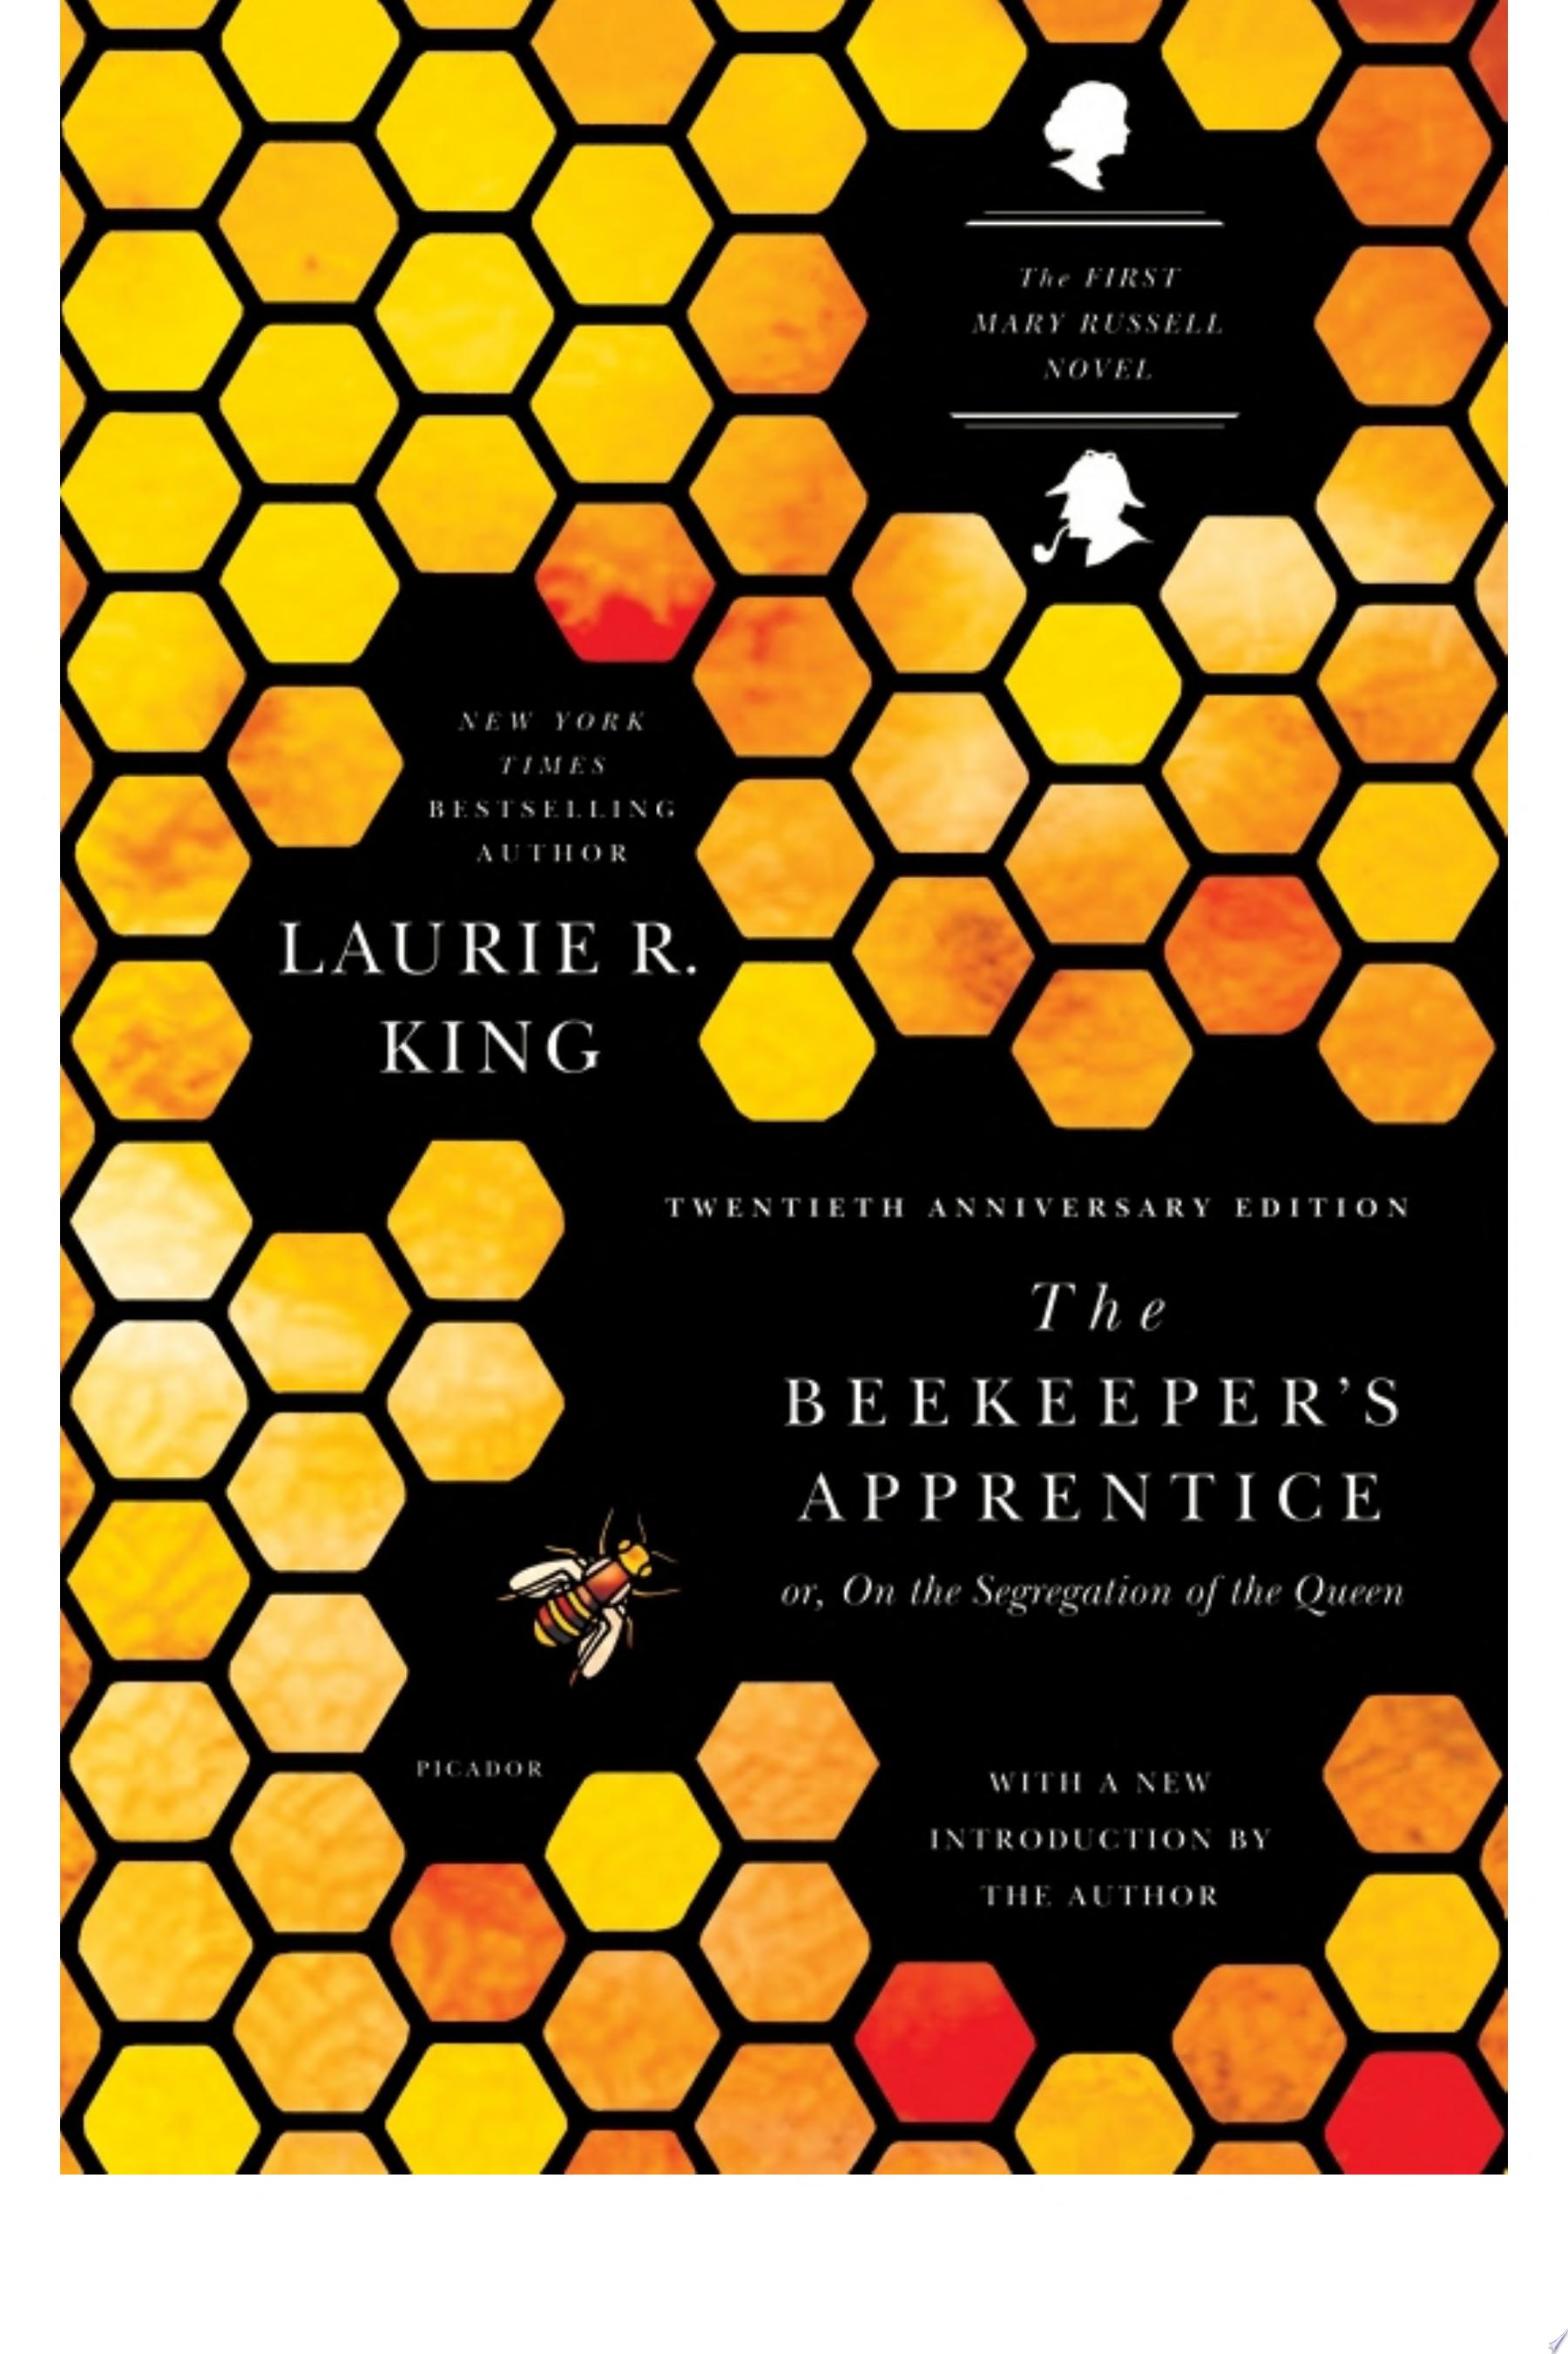 Image for "The Beekeeper's Apprentice"